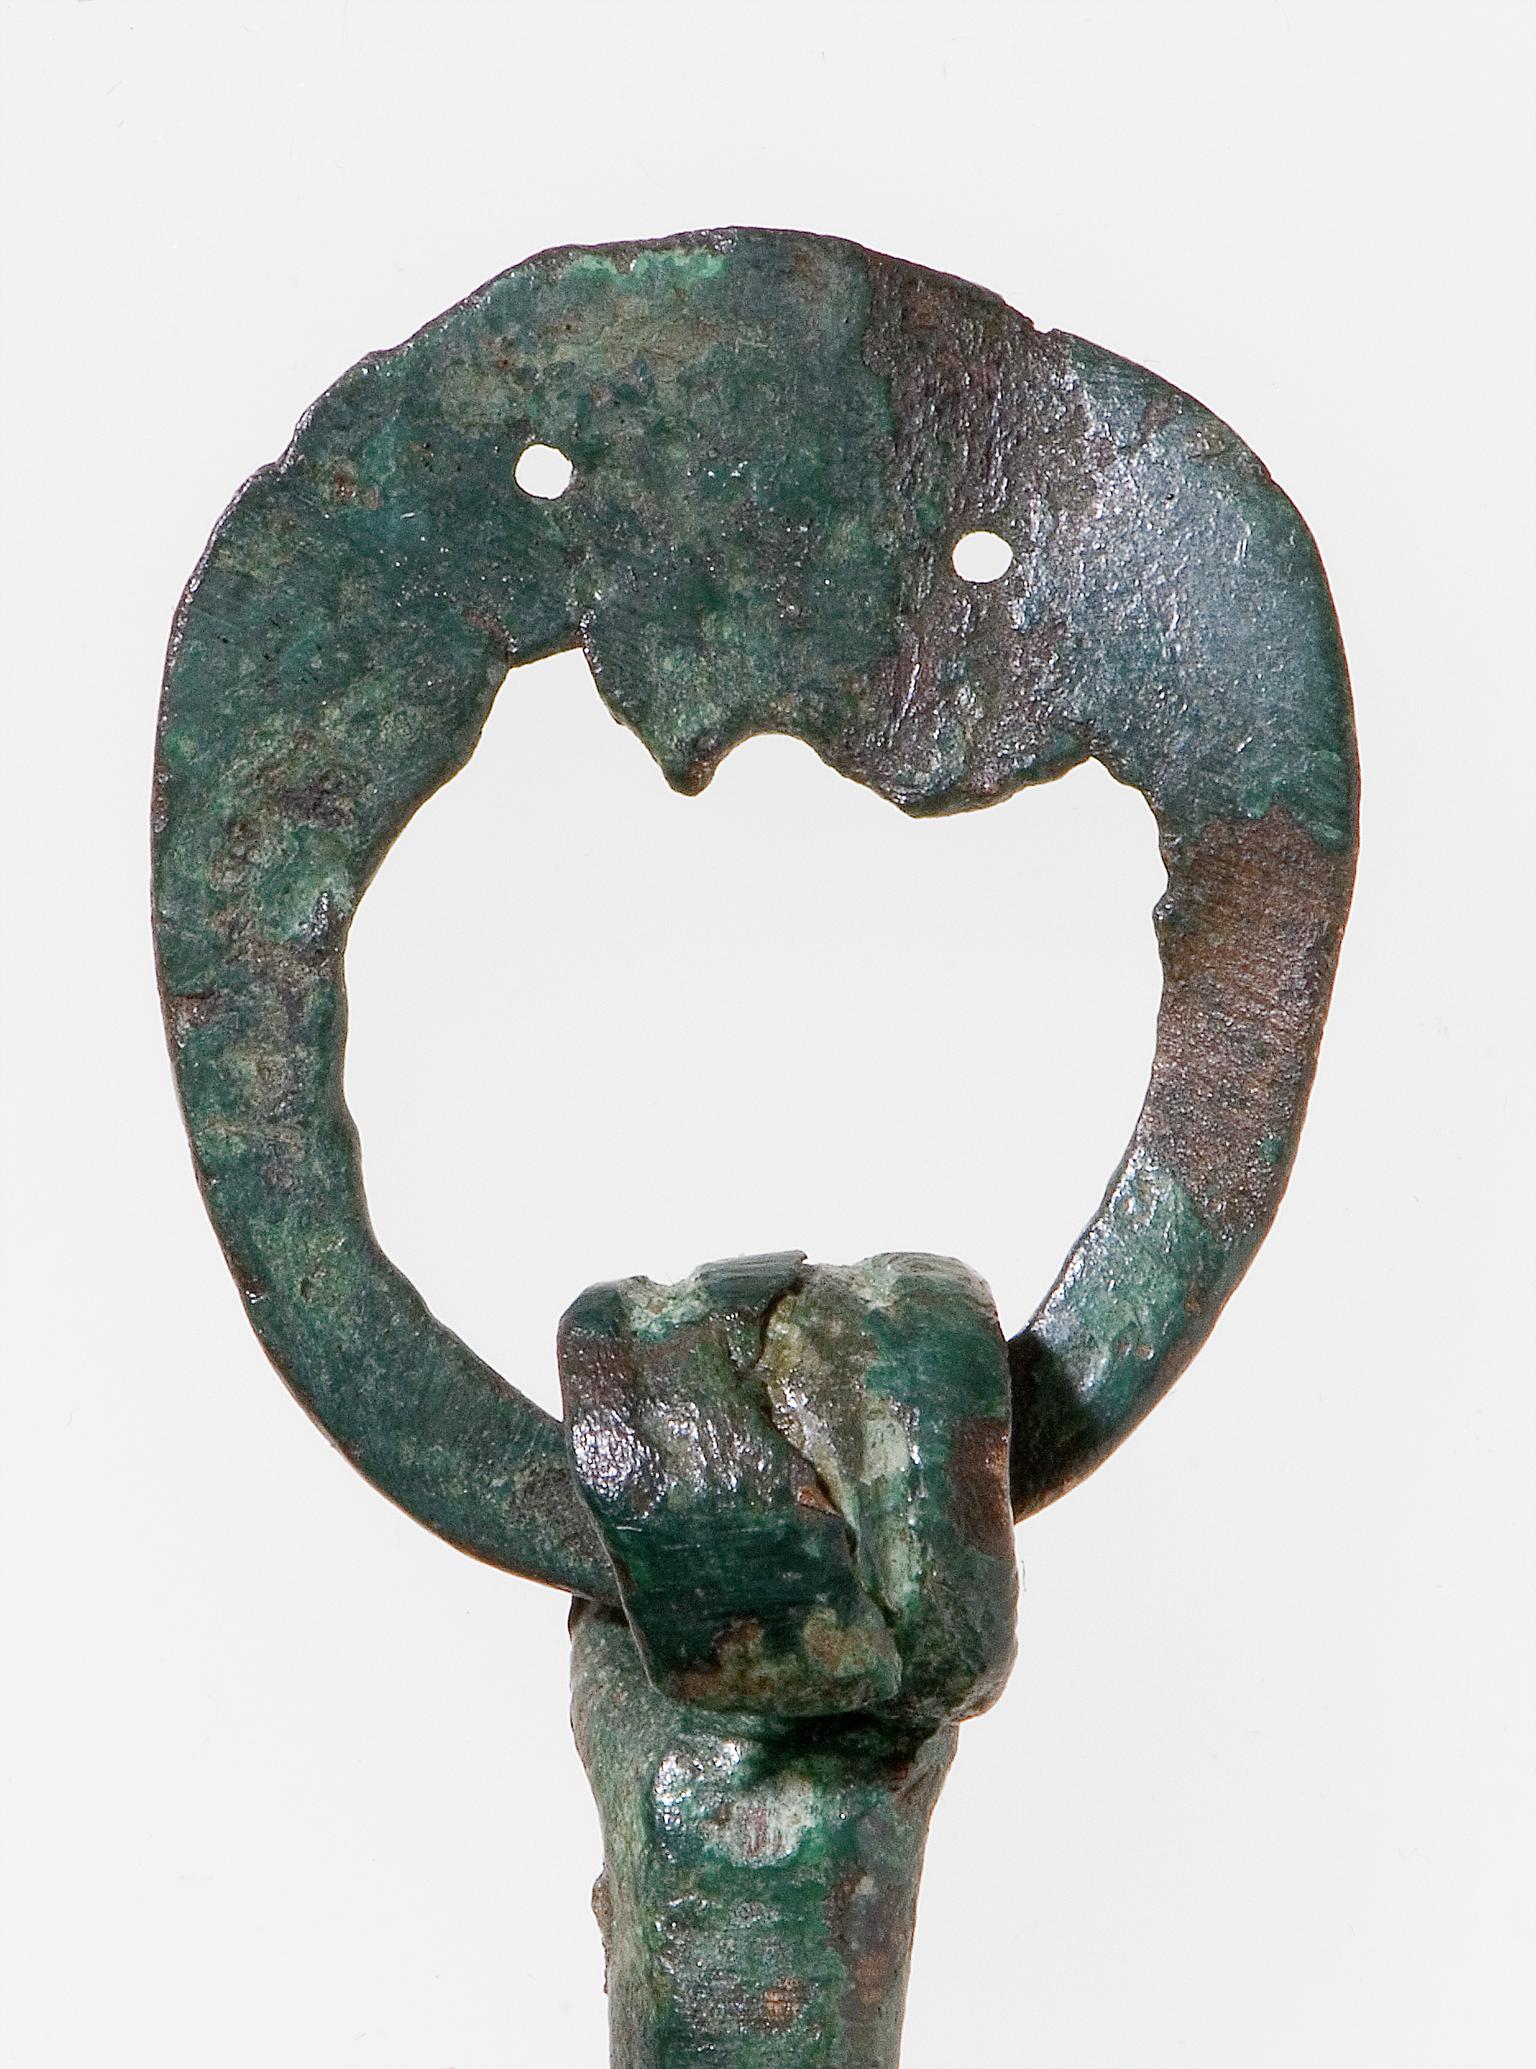 Early Medieval copper alloy brooch pin